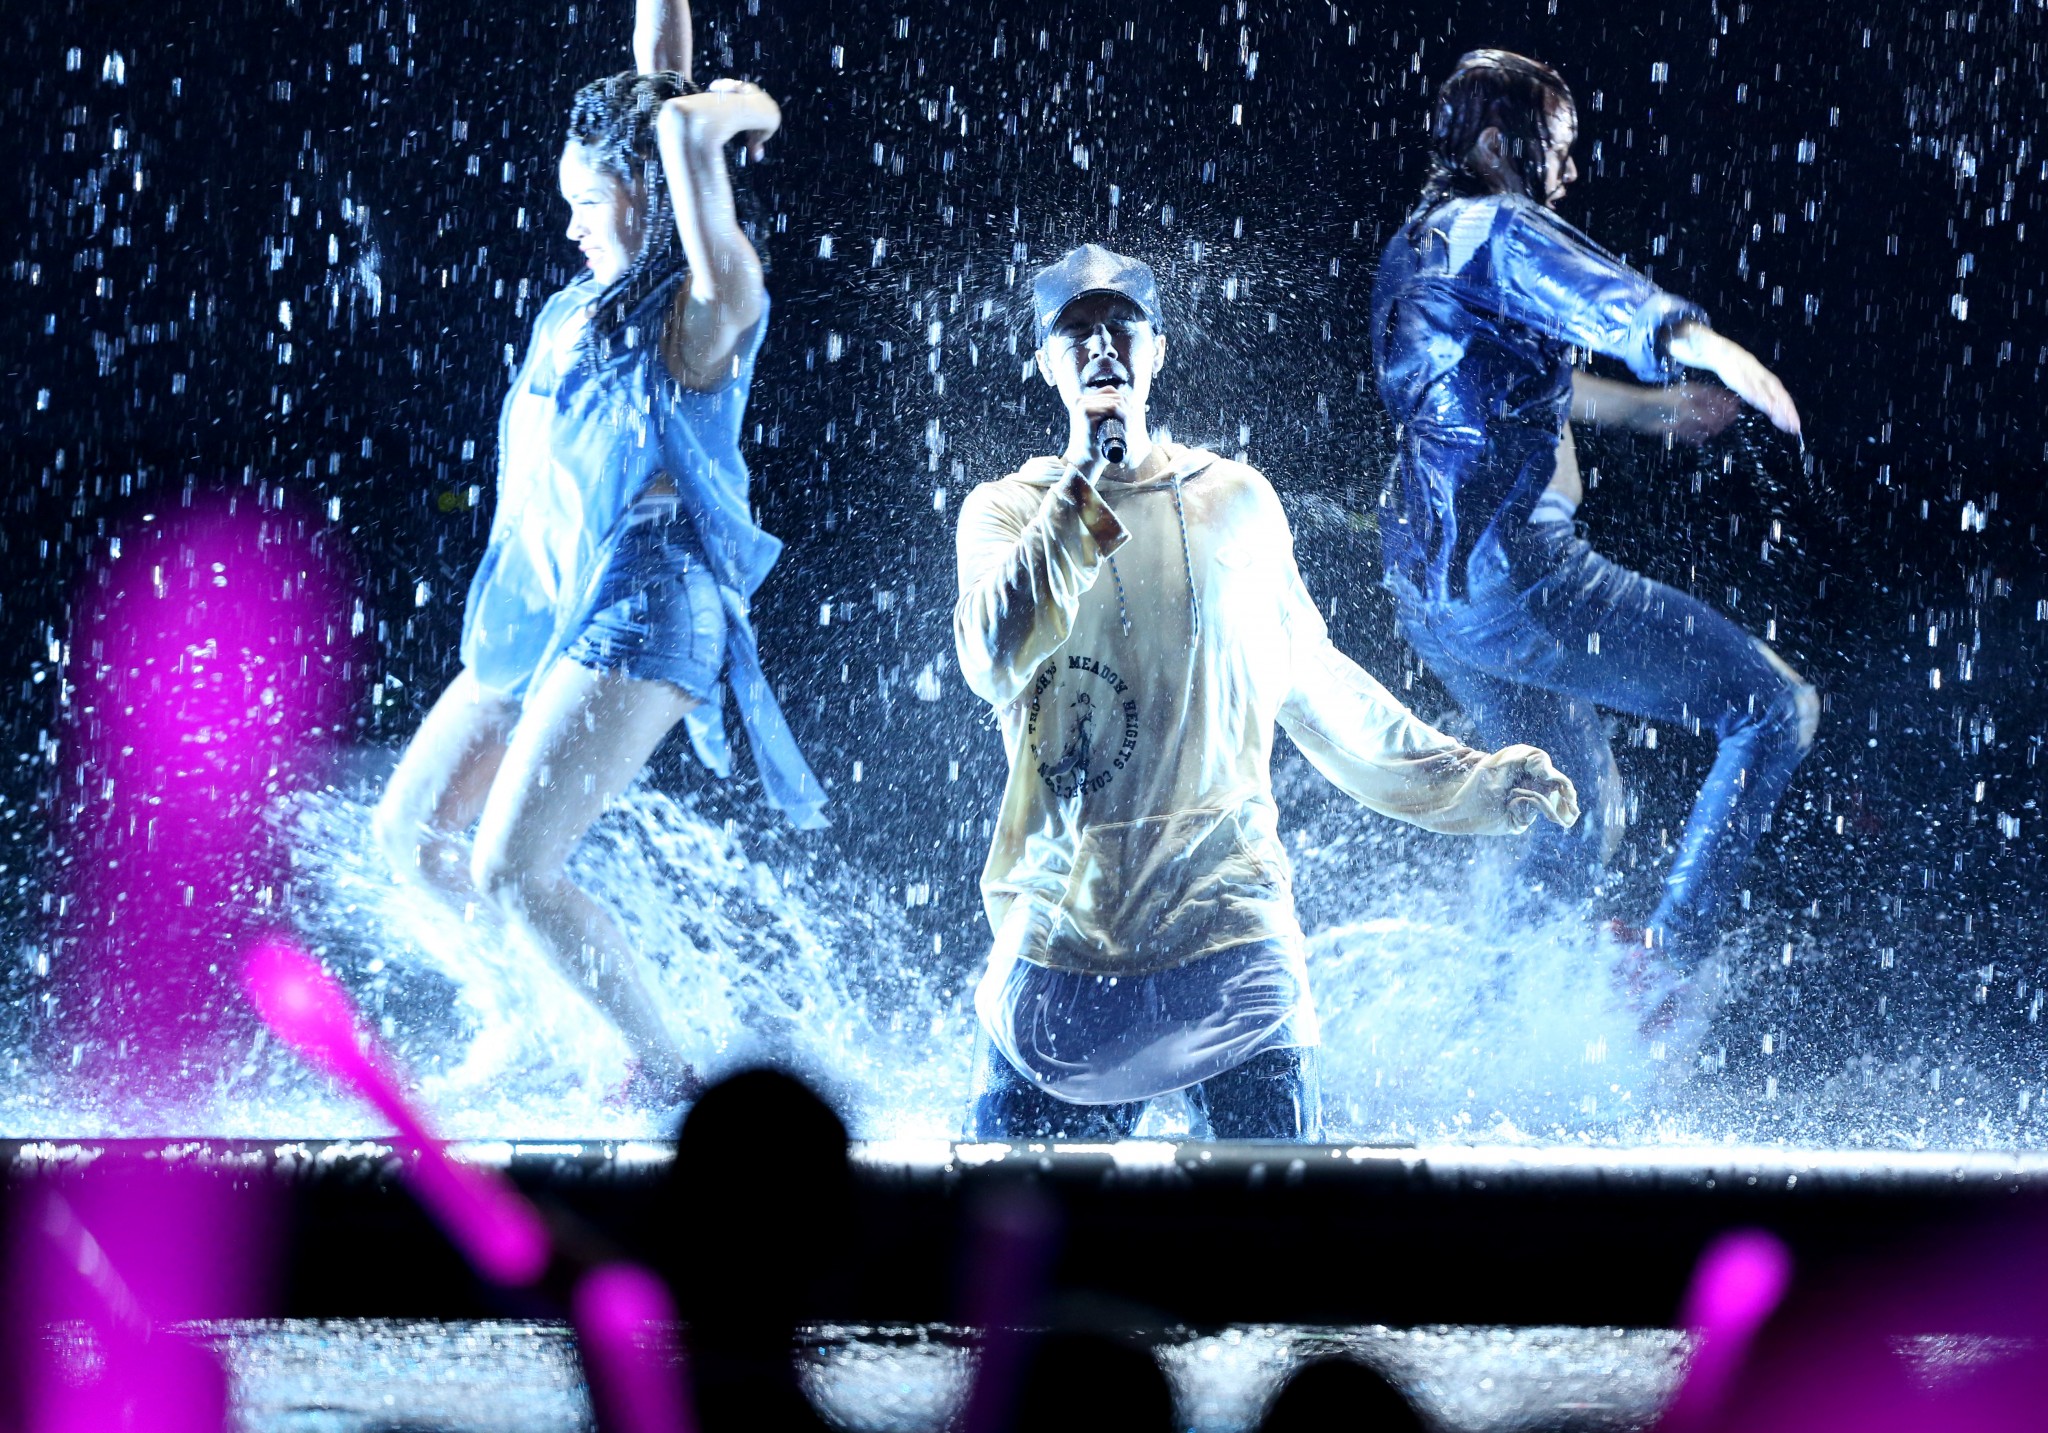 Justin Bieber performs at the American Music Awards at the Microsoft Theater on Sunday, Nov. 22, 2015, in Los Angeles. (Photo by Matt Sayles/Invision/AP)